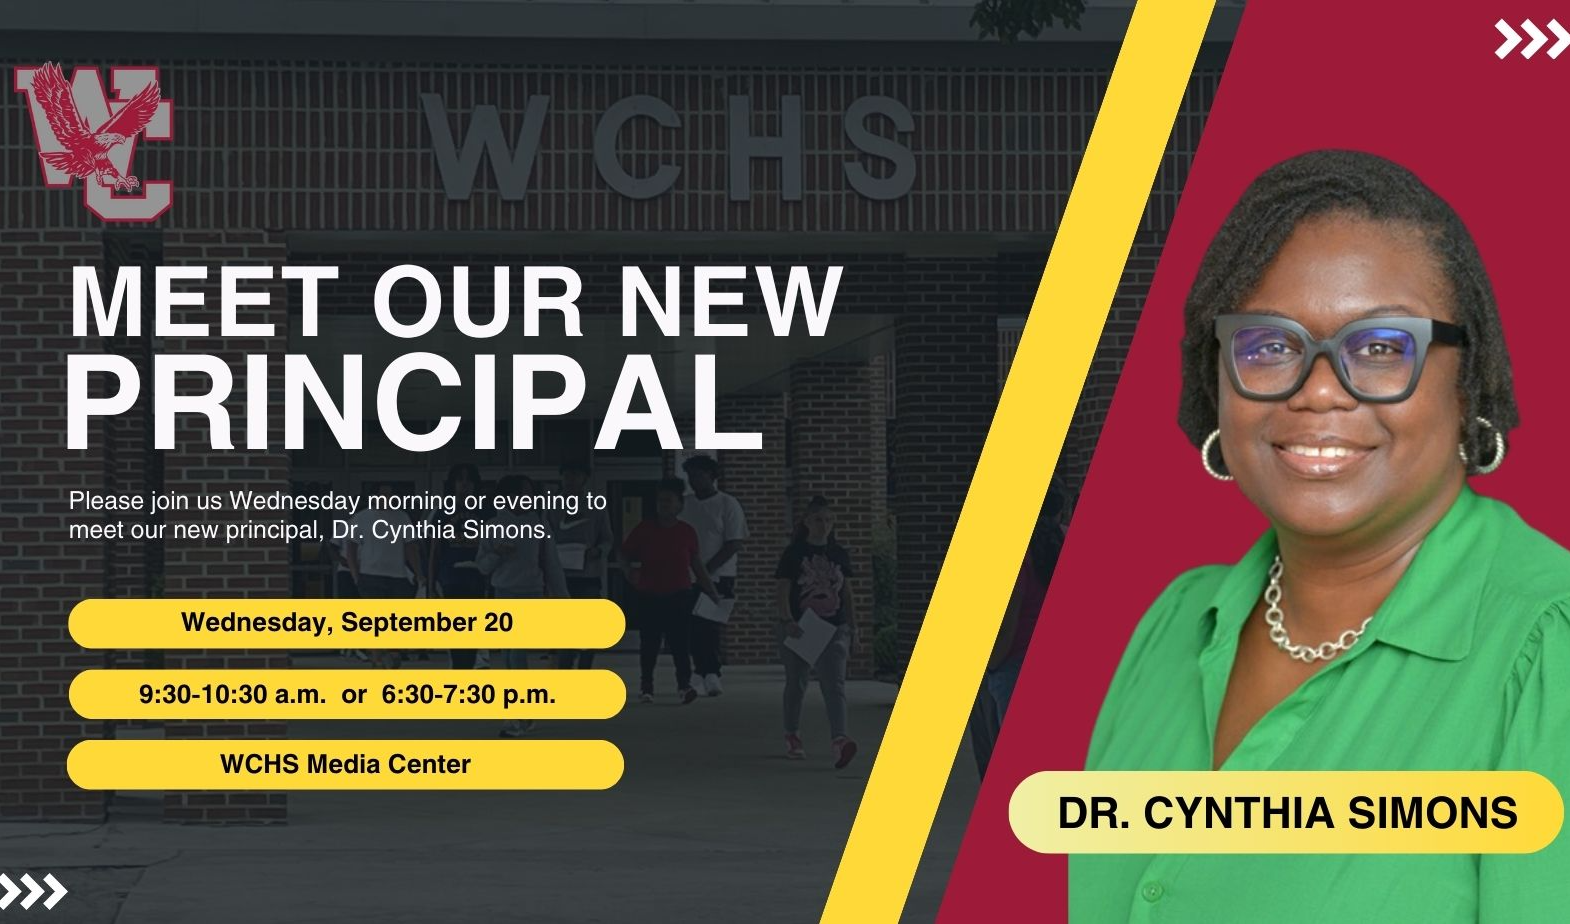 Meet our new principal, Dr. Cynthia Simons! Please join us Wednesday morning or evening to meet our new principal, Dr. Cynthia Simons.  Wednesday, September 20 at 9:30-10:30 a.m.  or  6:30-7:30 p.m. in the WCHS Media Center. 